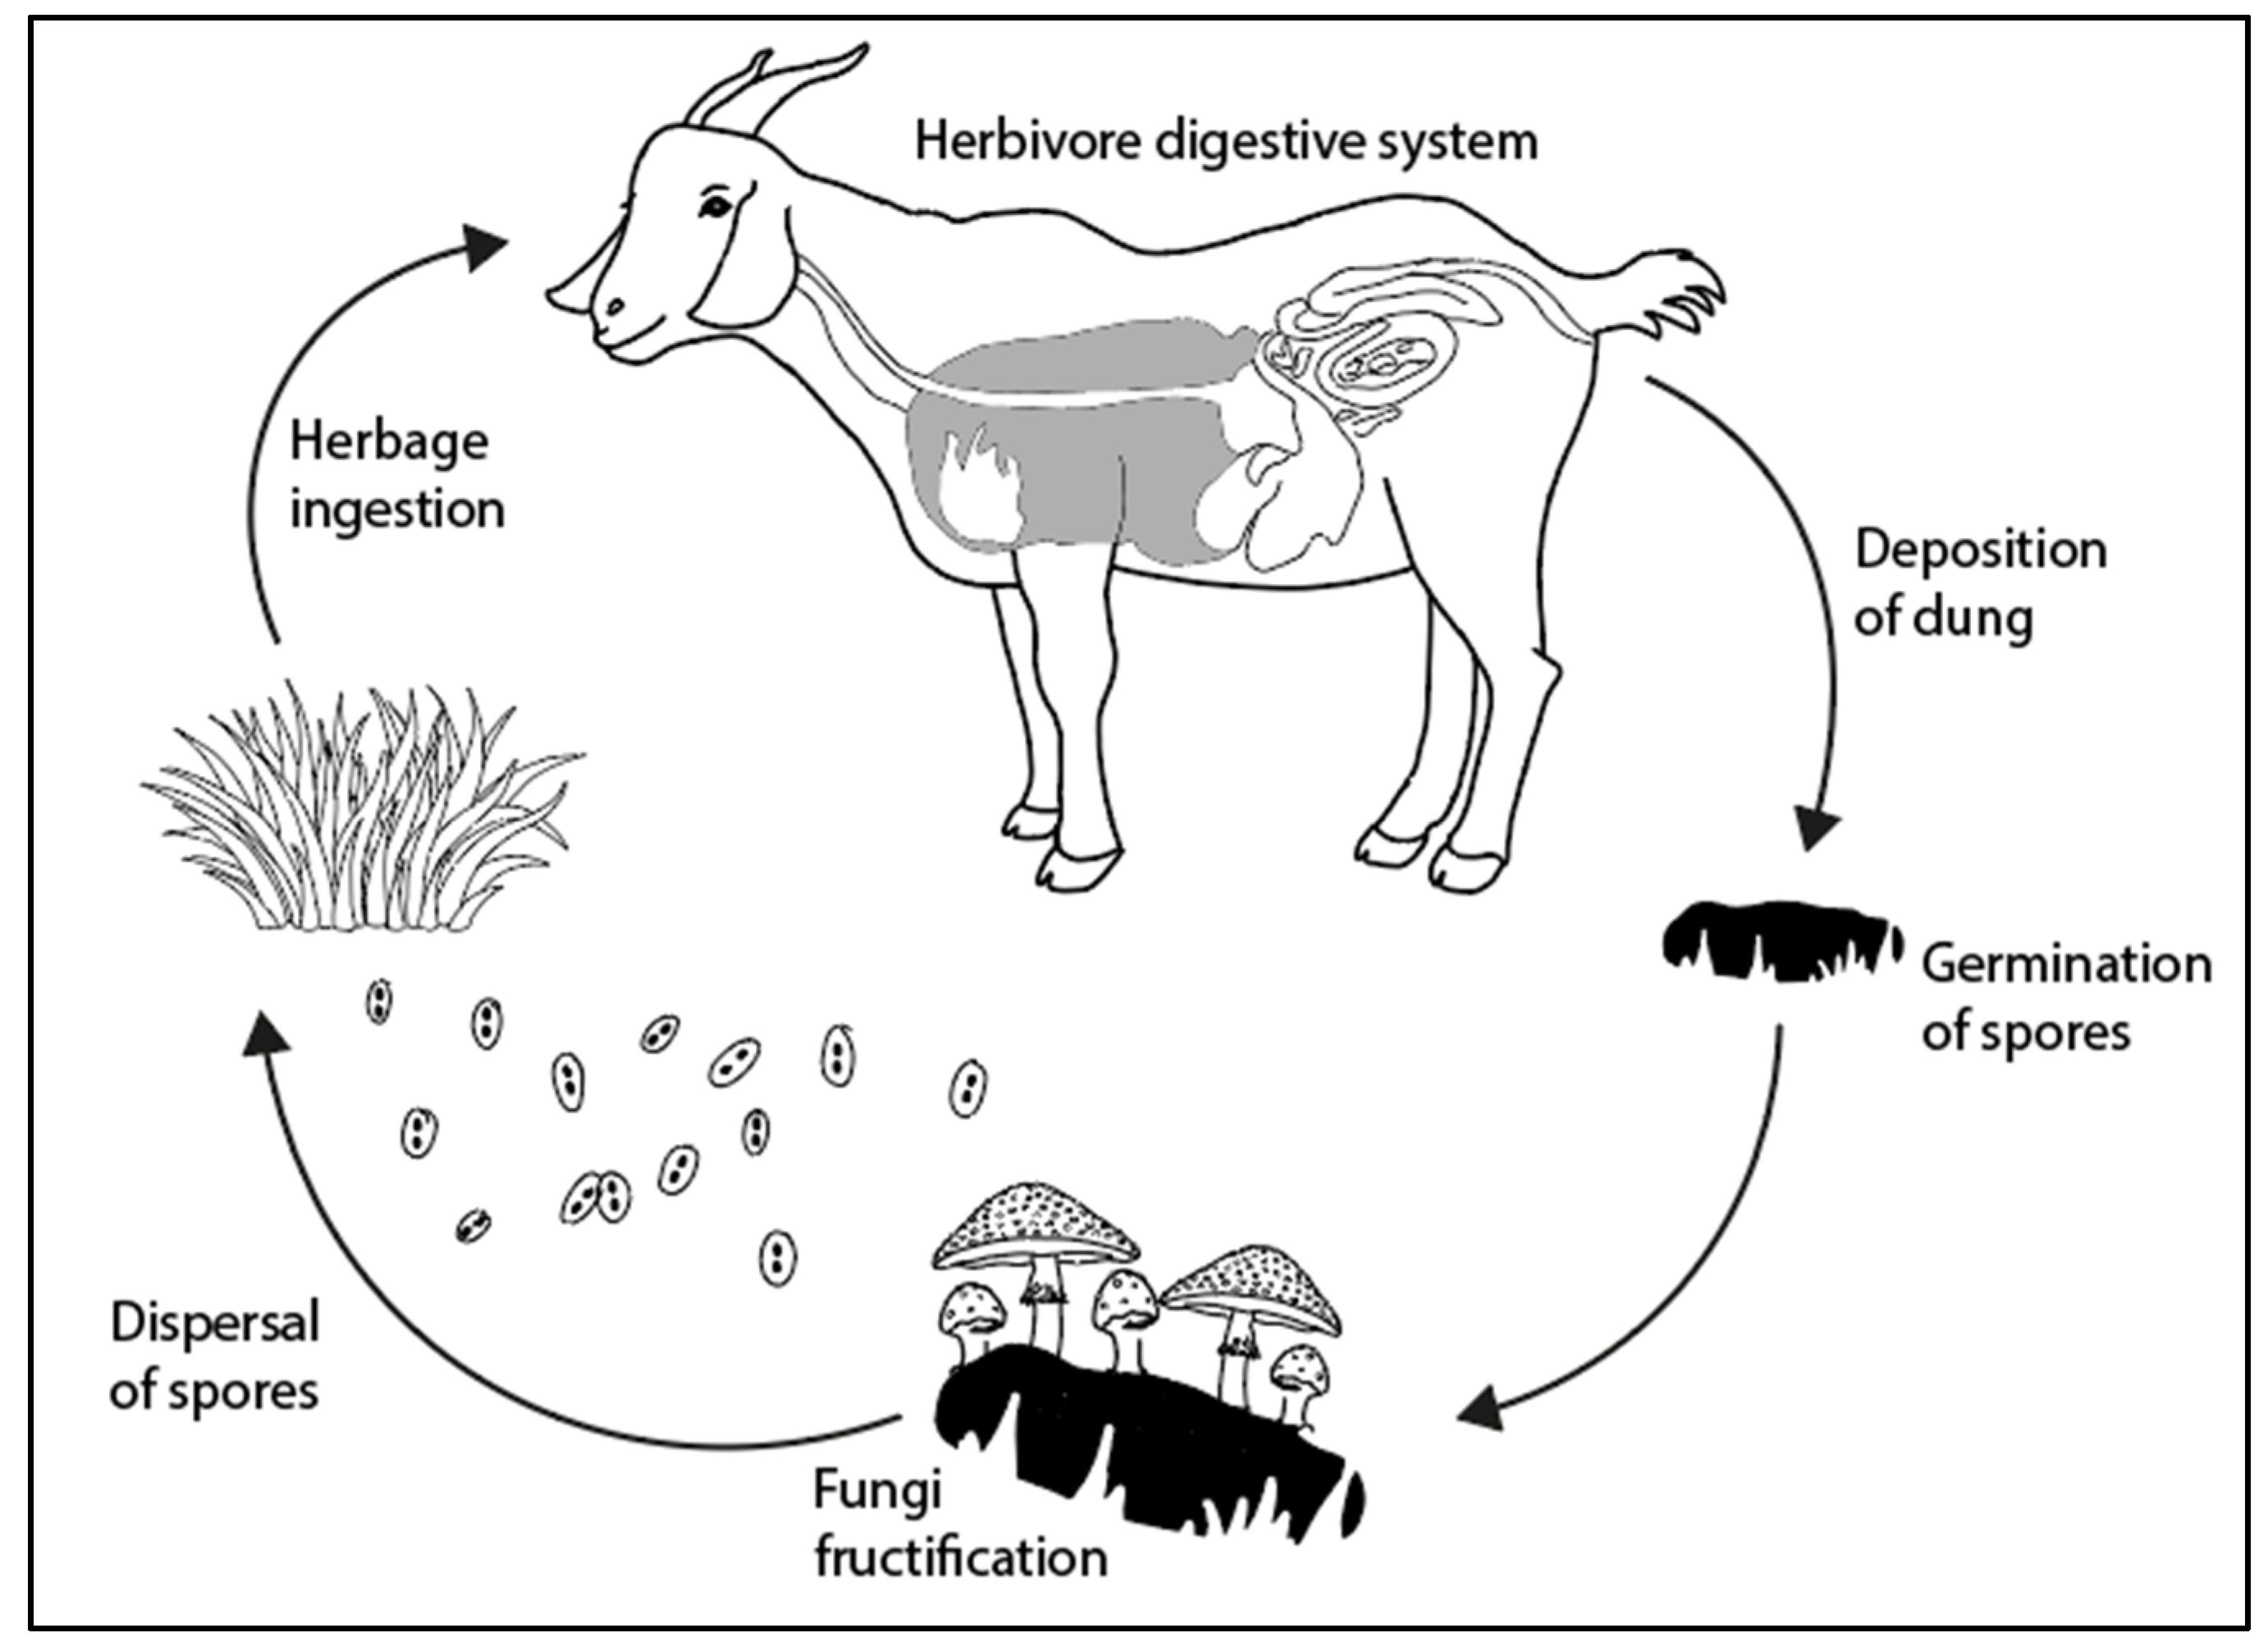 Quaternary | Free Full-Text | On the Use of Spores of Coprophilous Fungi  Preserved in Sediments to Indicate Past Herbivore Presence